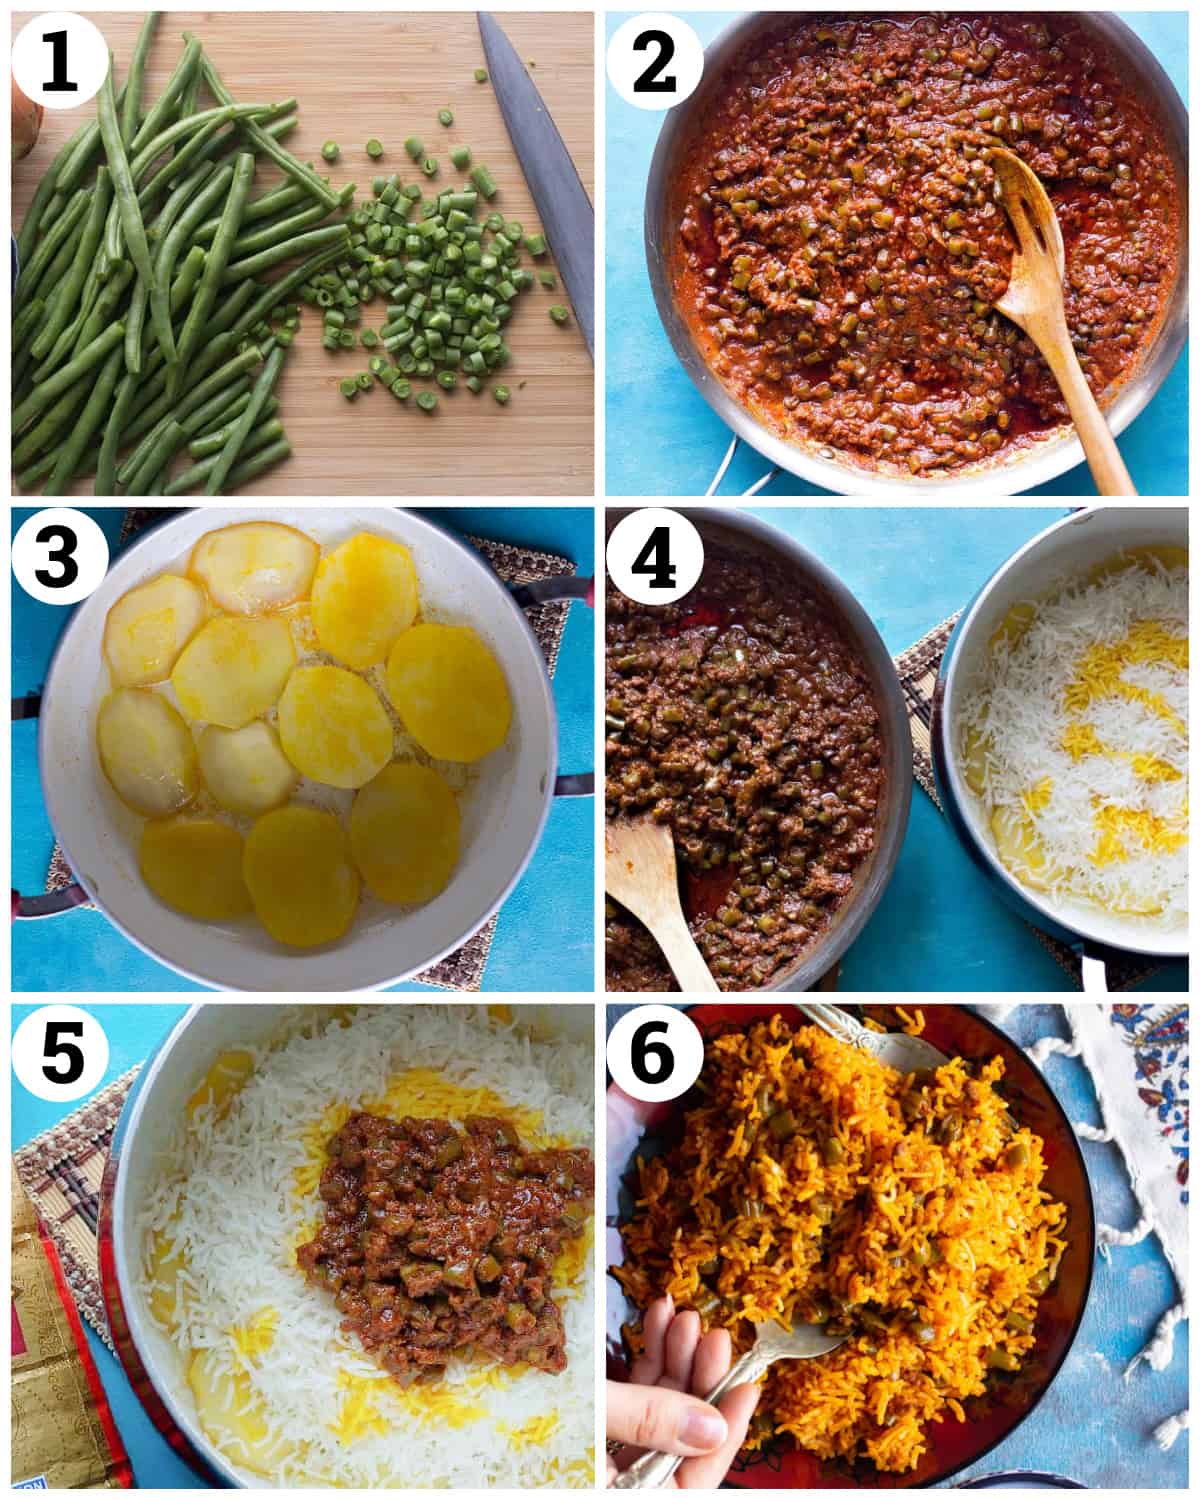 cook the green beans and make the ground beef filling. Par cook the rice and start layering. Cook for 45 minutes. 